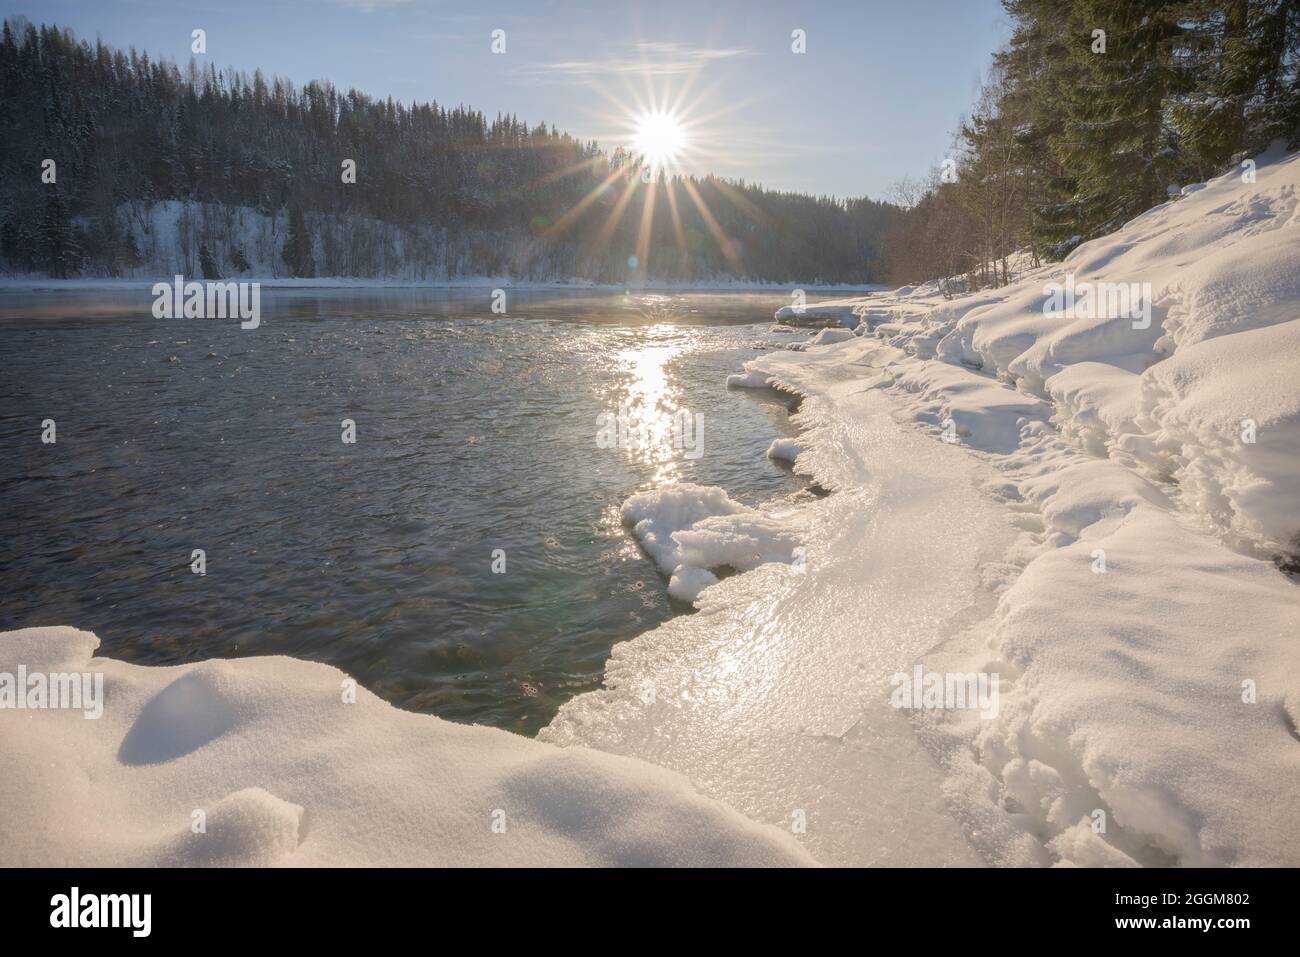 sun beams in swedish winter landscape with trees Stock Photo